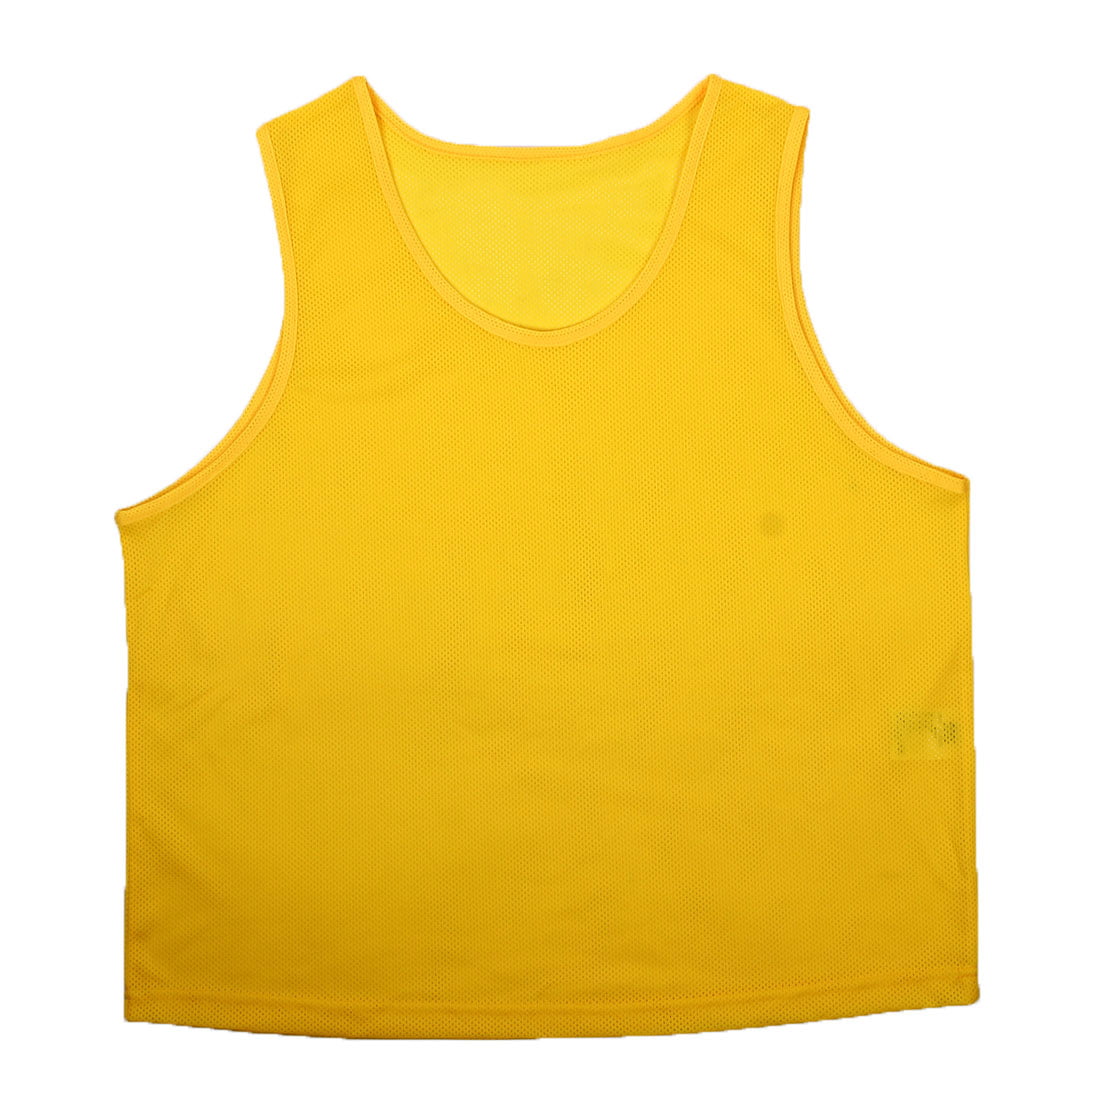 Training Vest Practice Soccer Bib Yellow for Adult Sports Football ...